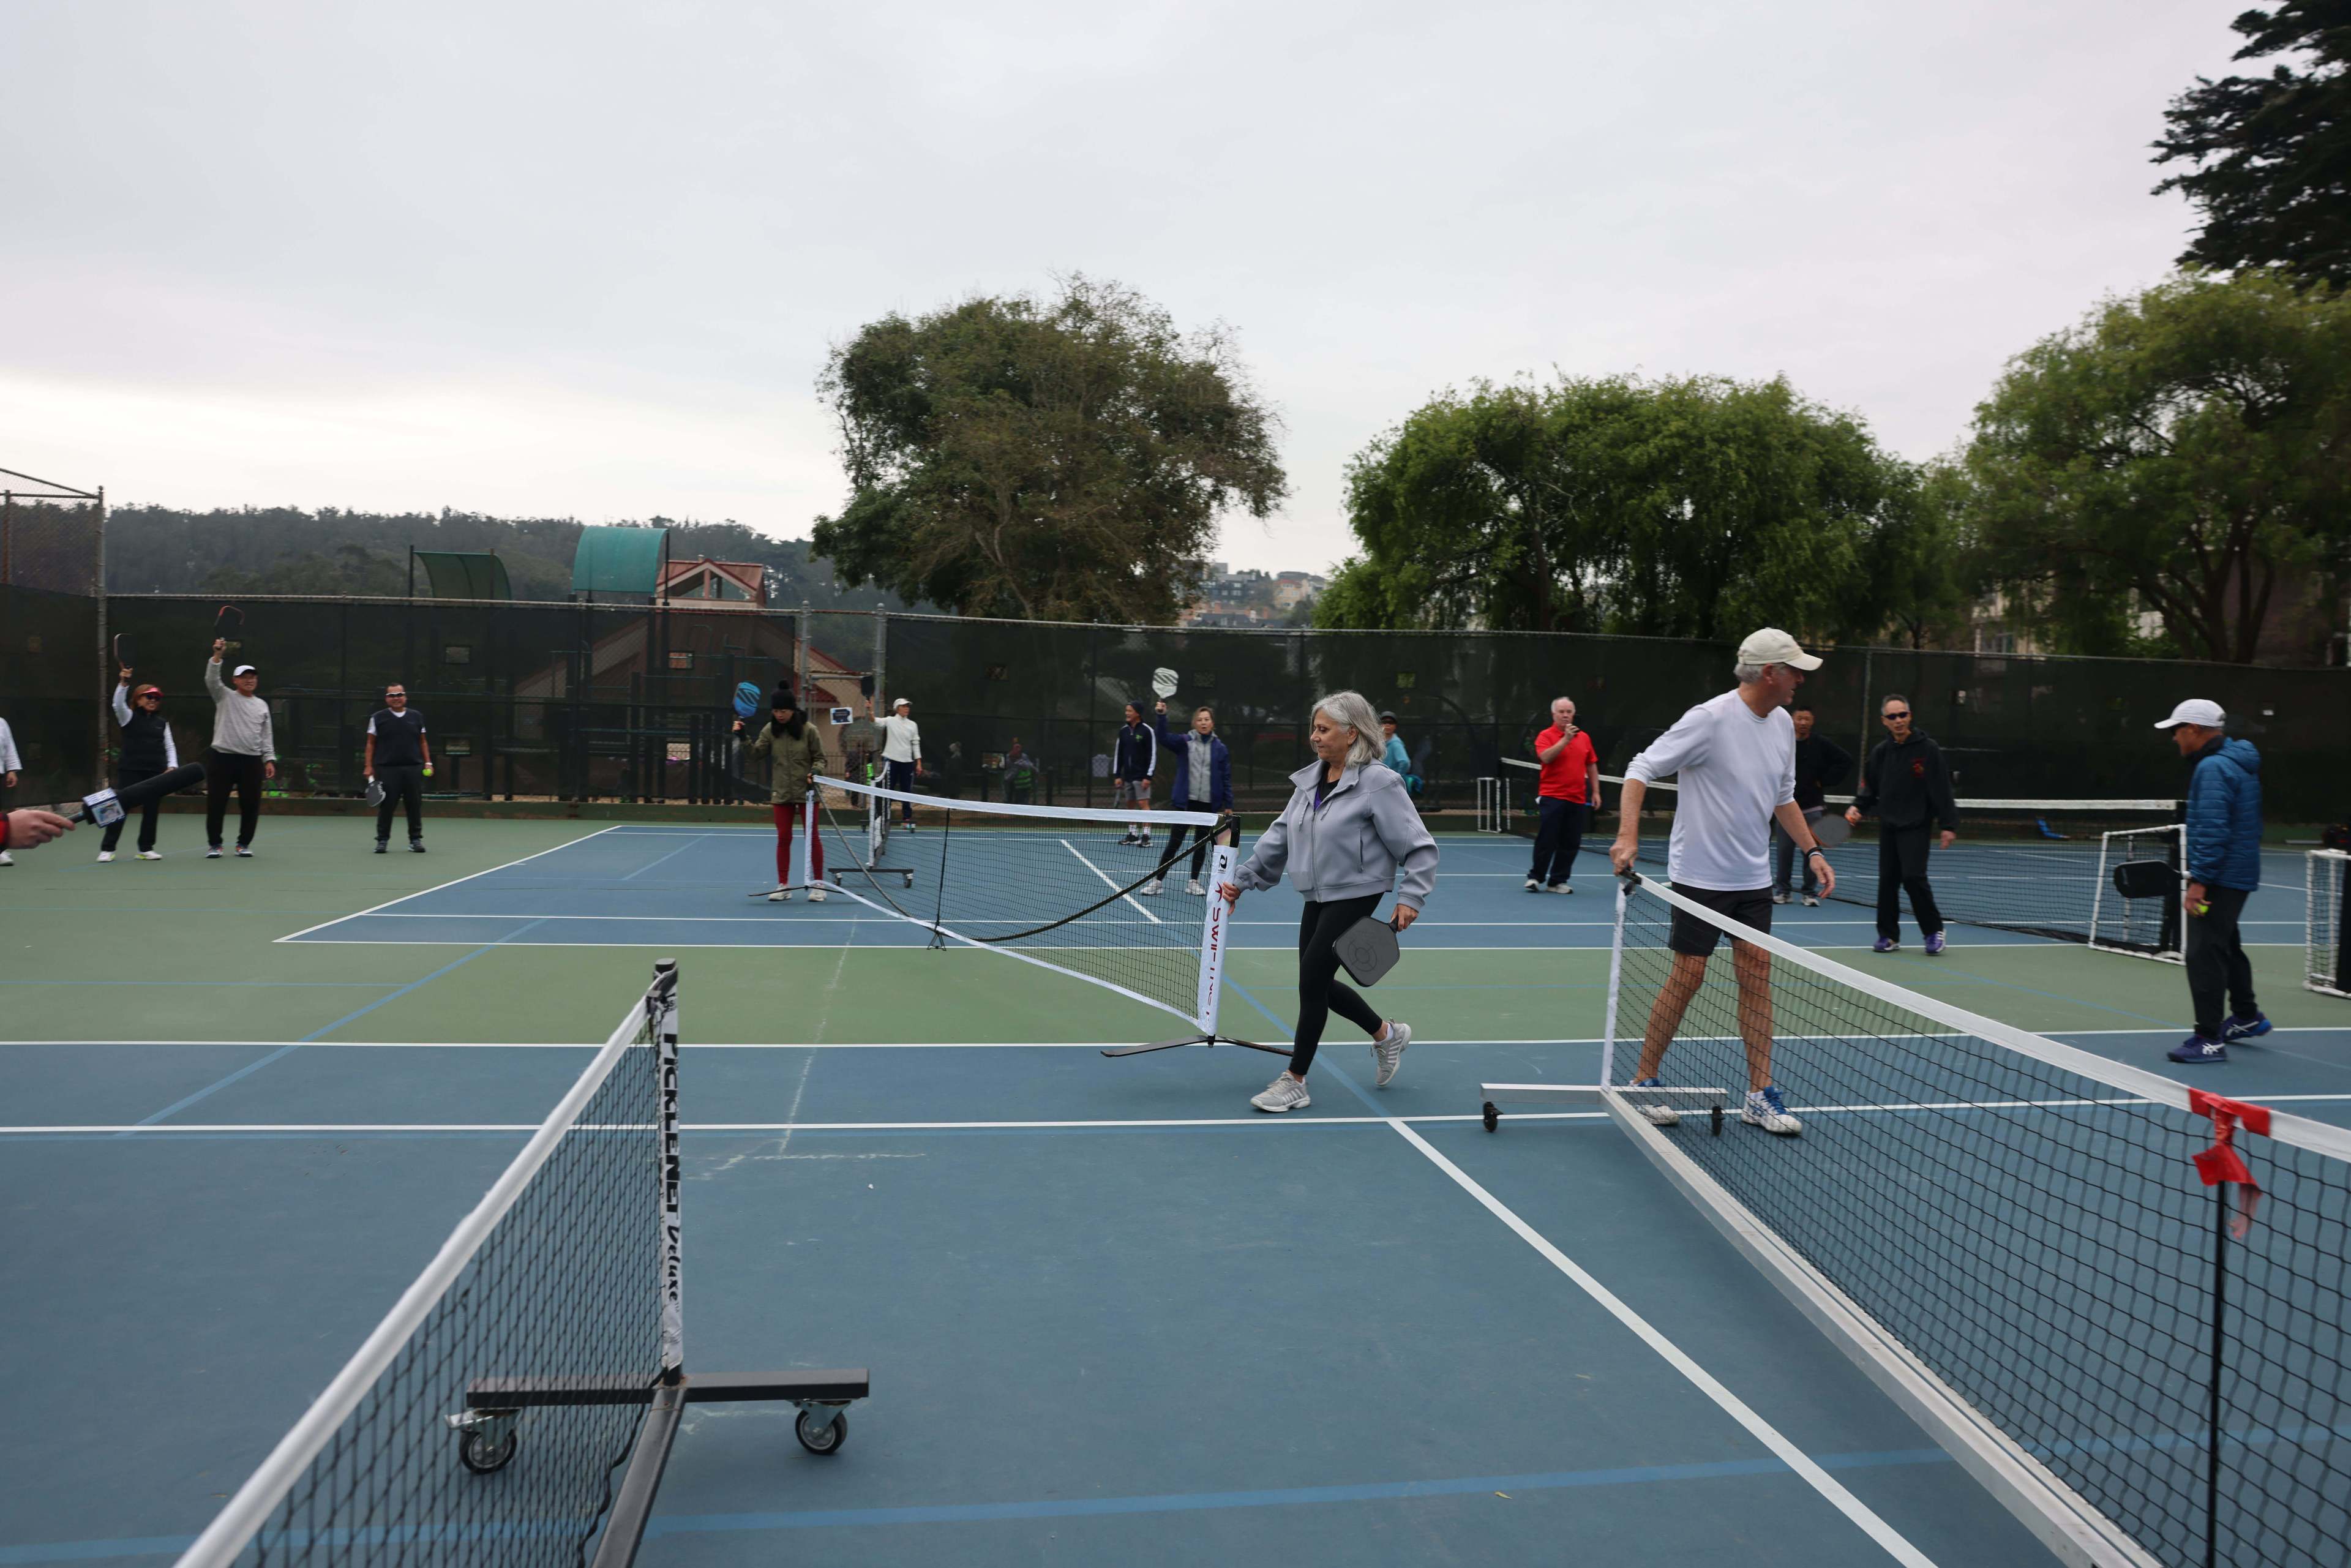 People playing tennis on multiple courts with trees and overcast sky in the background.